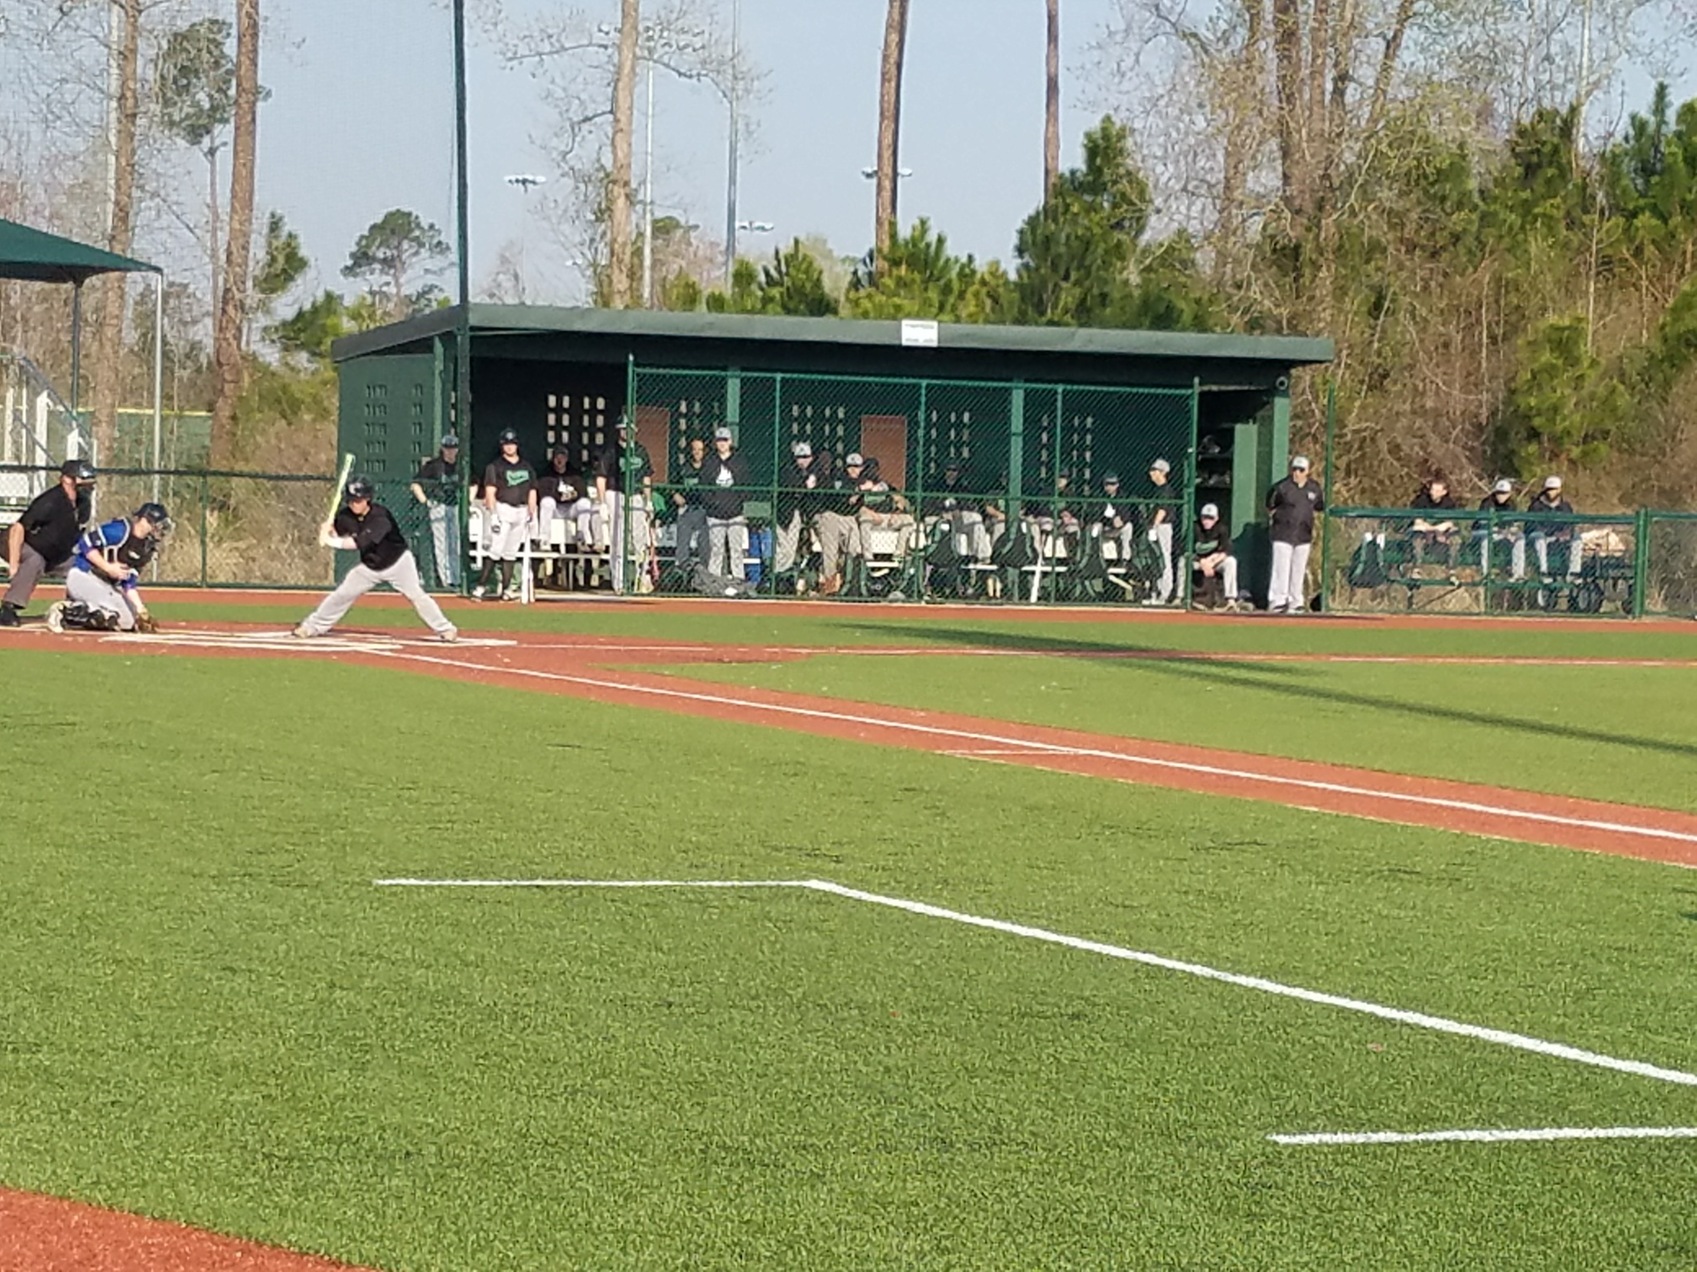 Vikings Win Streak Halted at 8 with 5-1 Loss to Cumberland County College